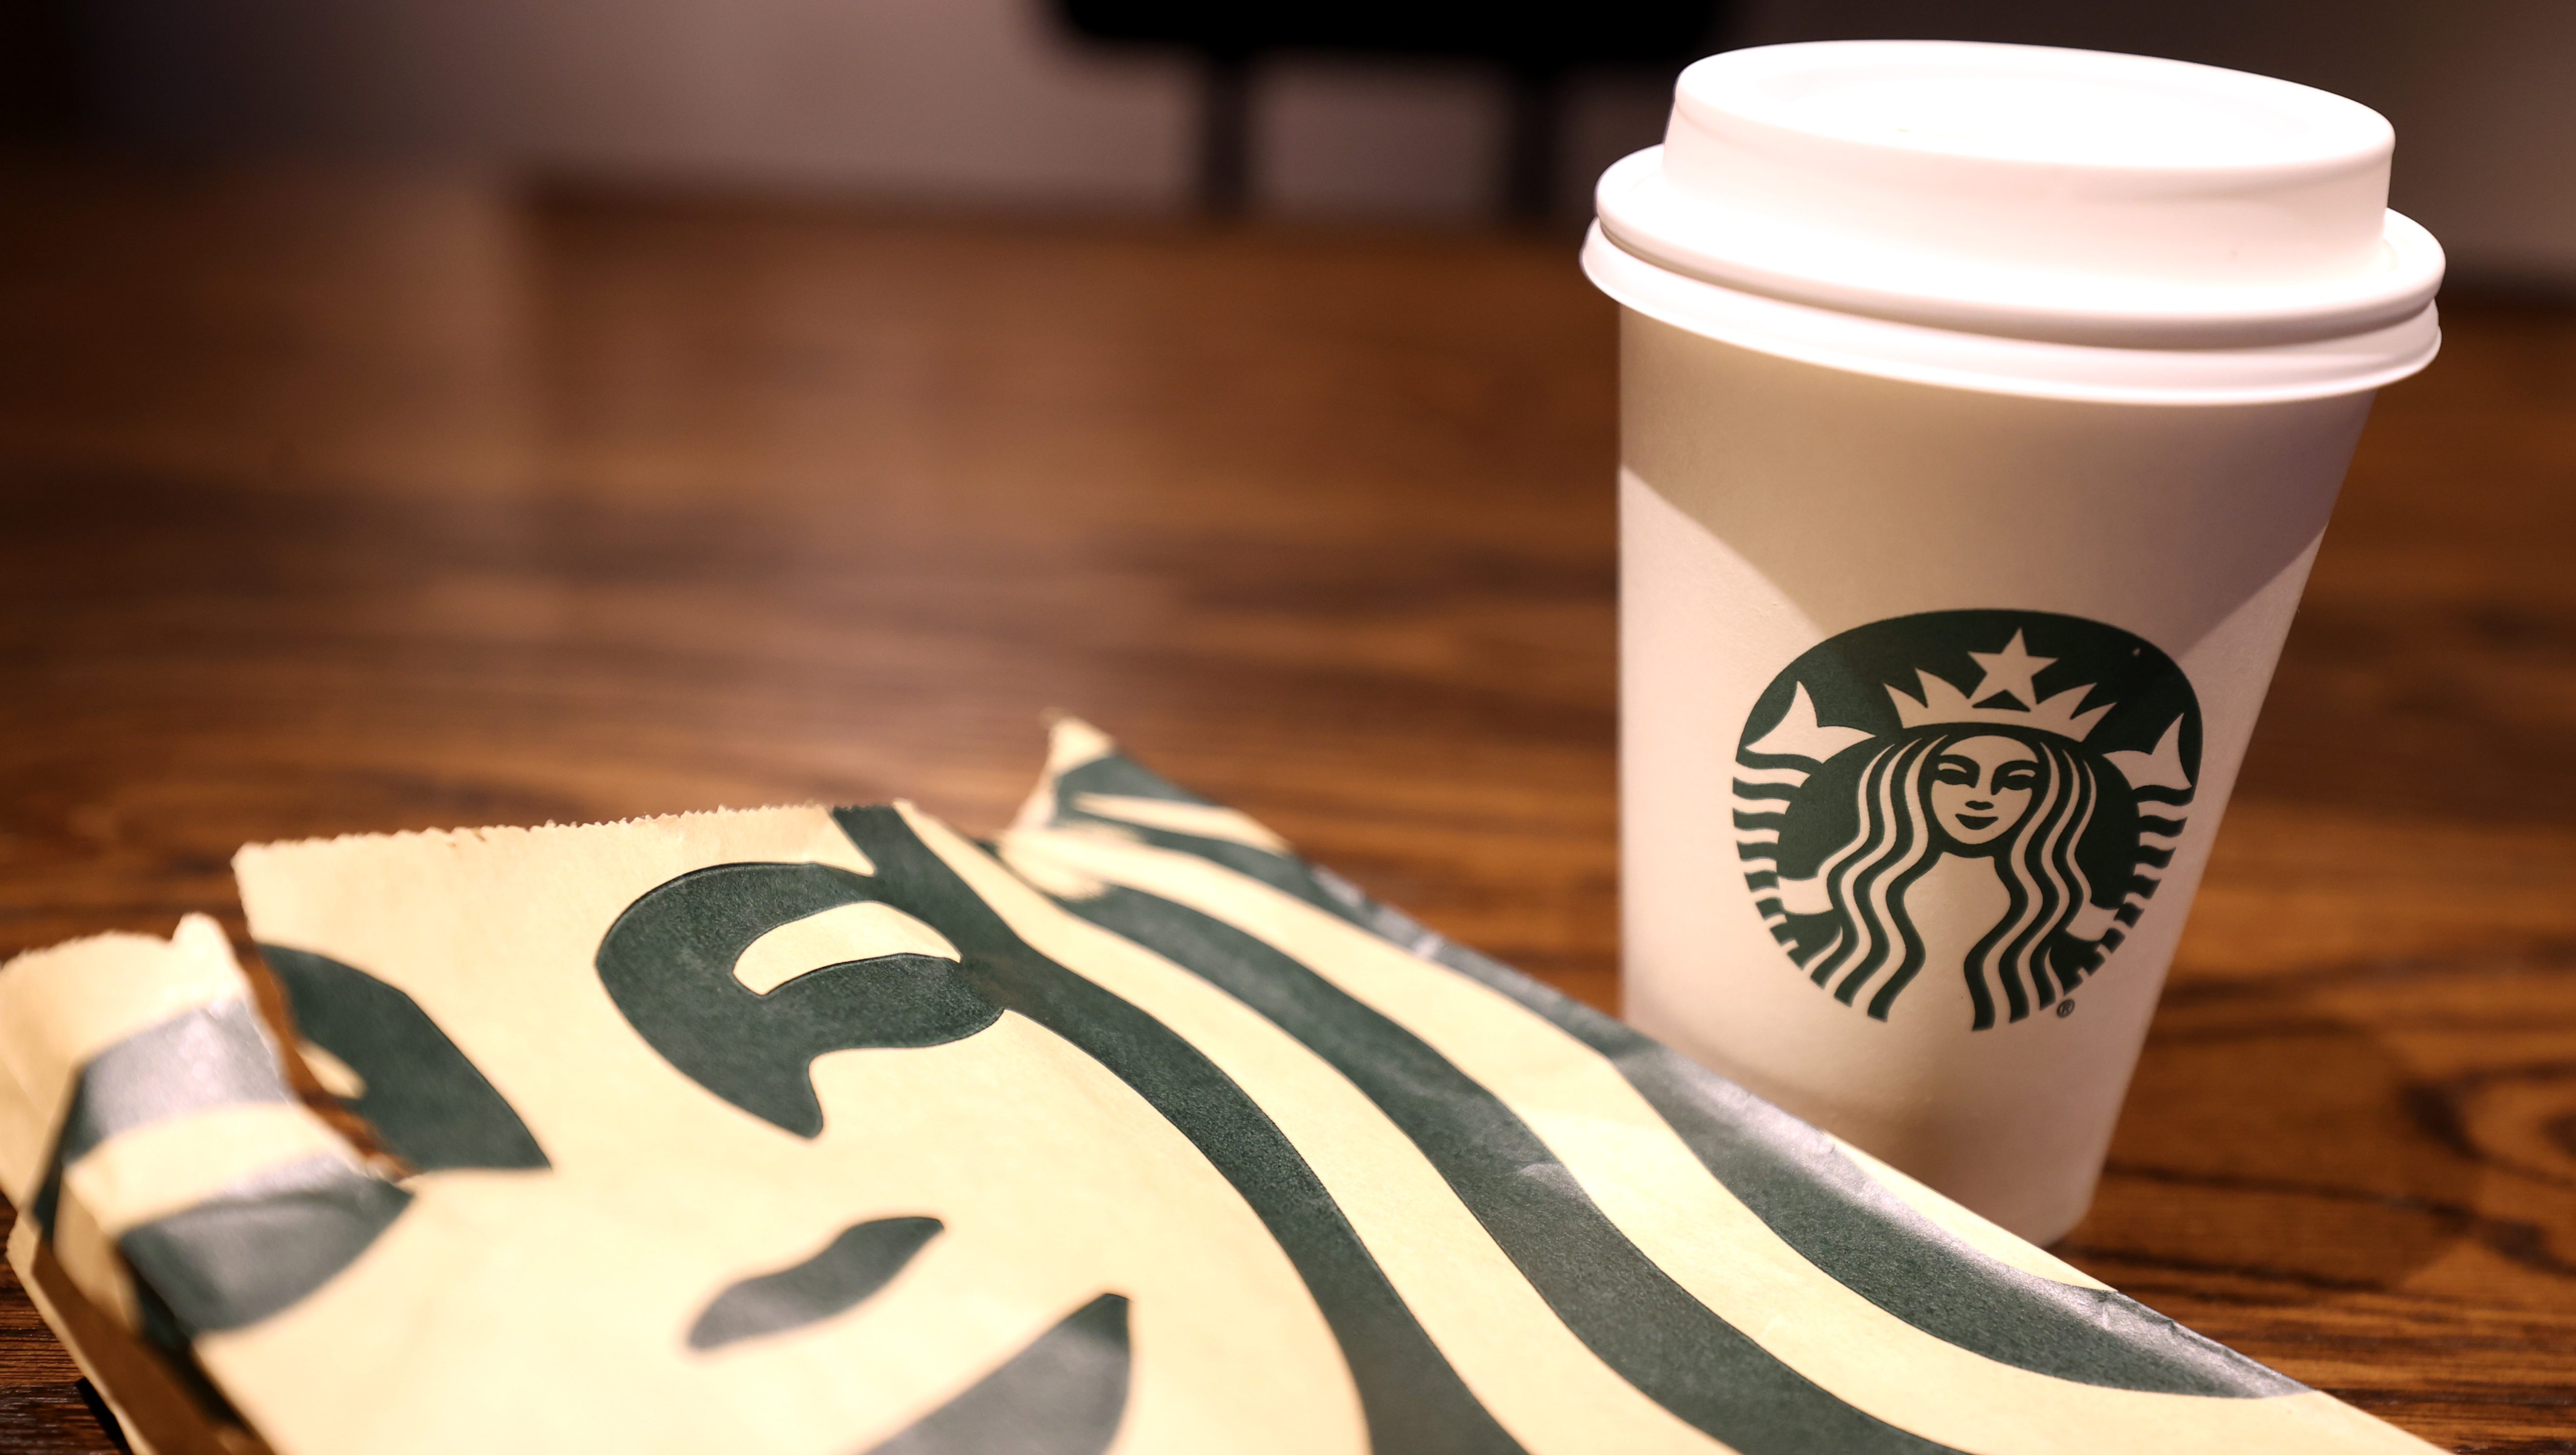 Why many Starbucks fans are angry over new rewards program